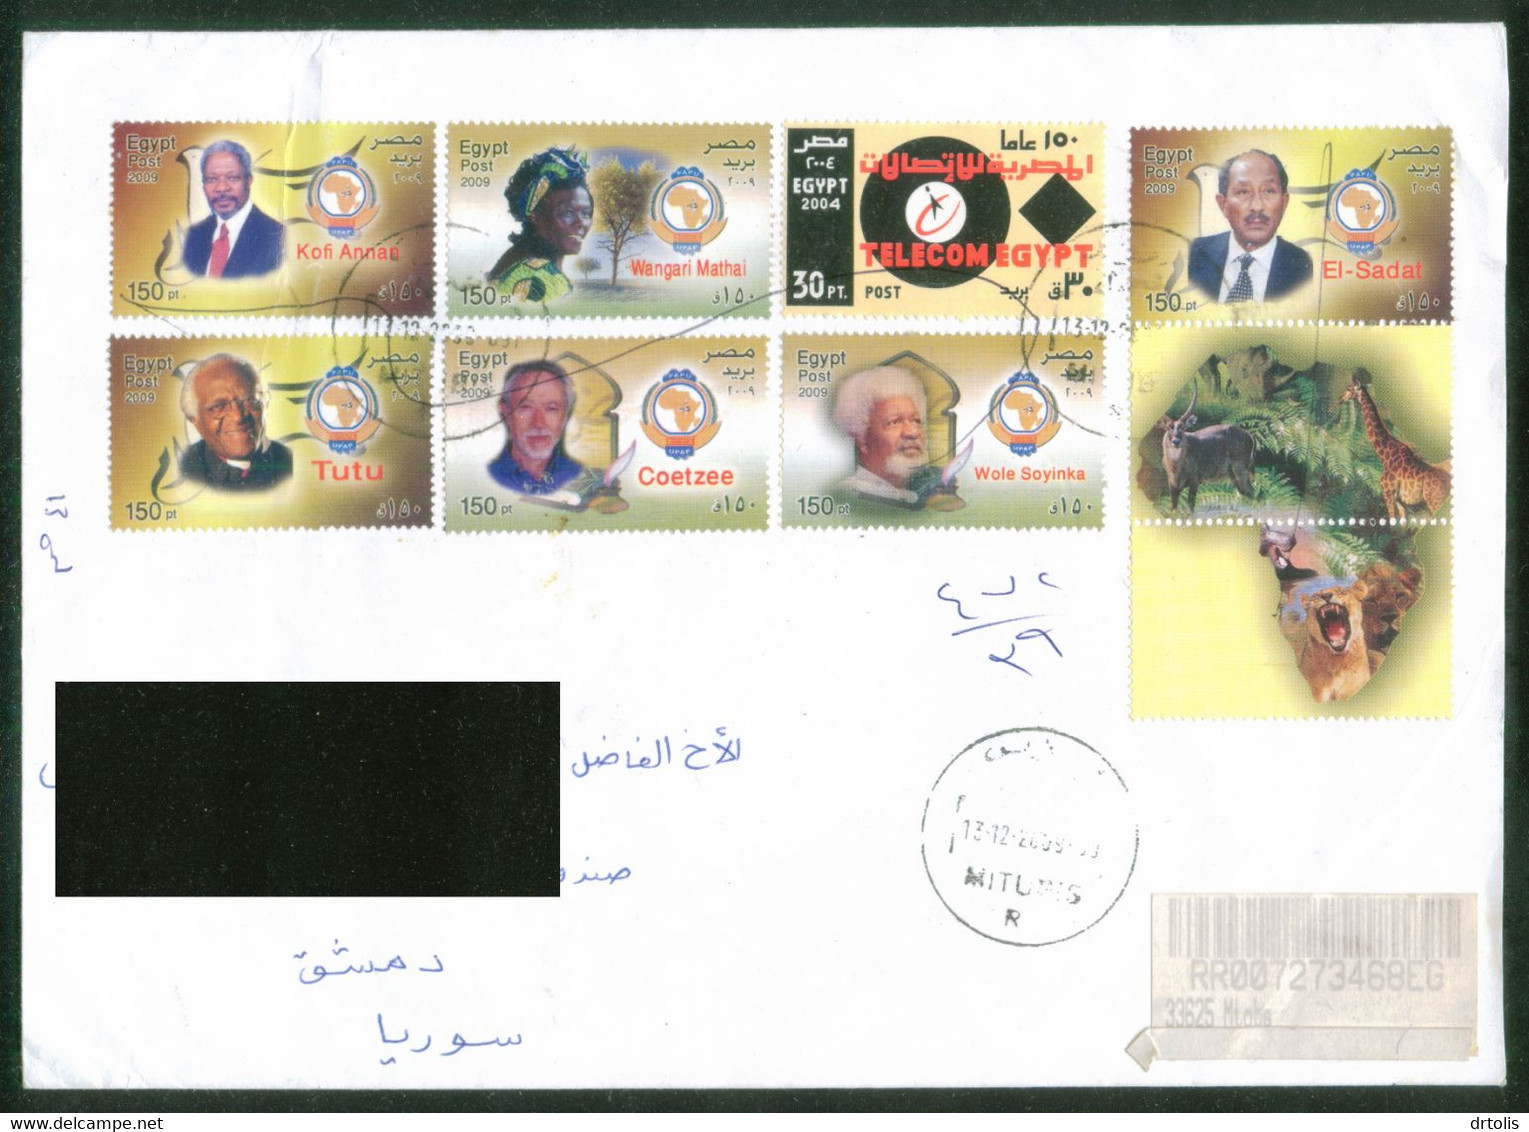 EGYPT / SYRIA / 2004 / THE WITHDRAWN TELECOM STAMP ON COVER TO SYRIA - Lettres & Documents